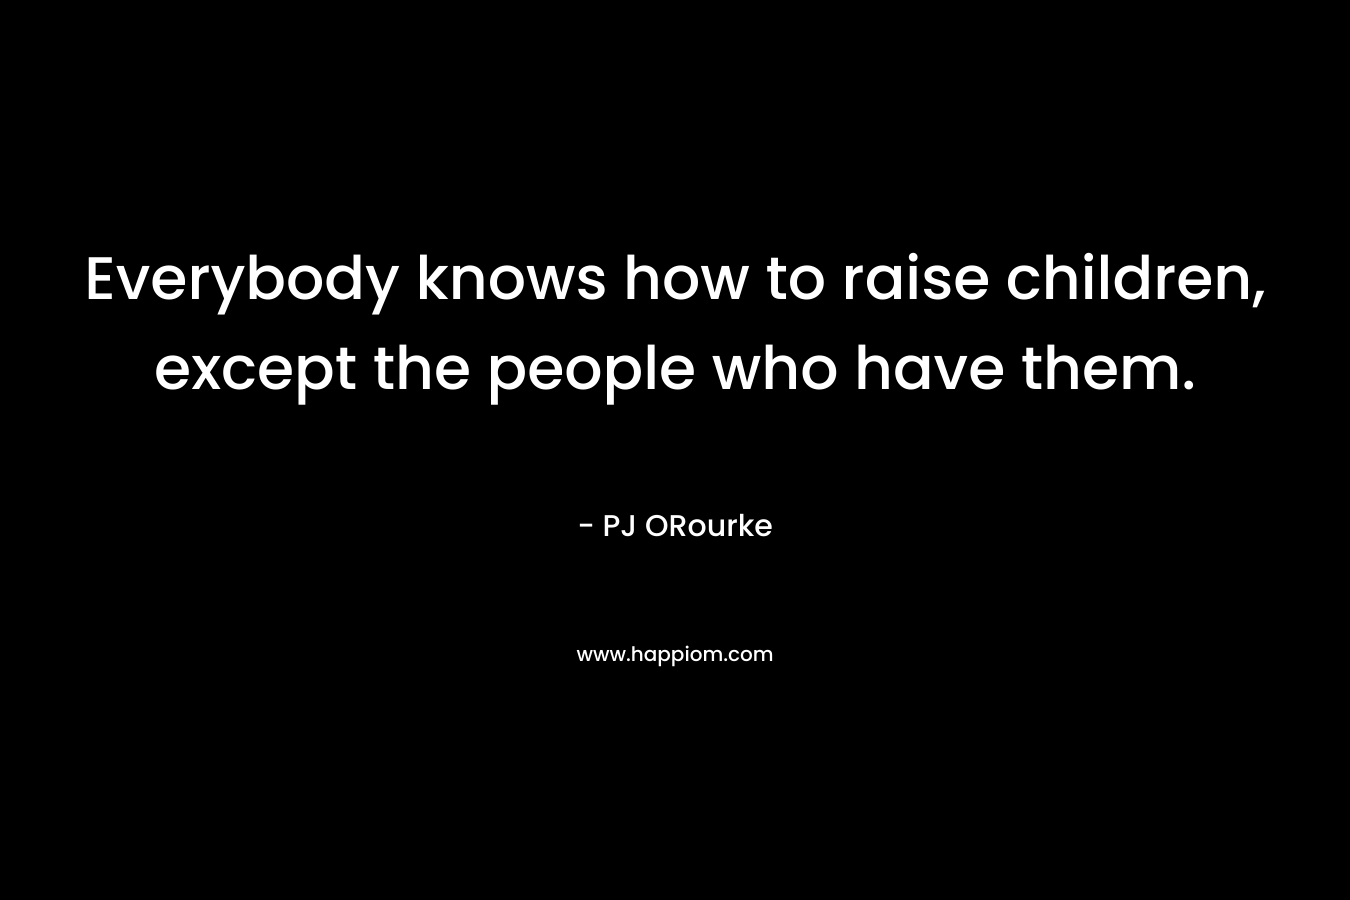 Everybody knows how to raise children, except the people who have them.